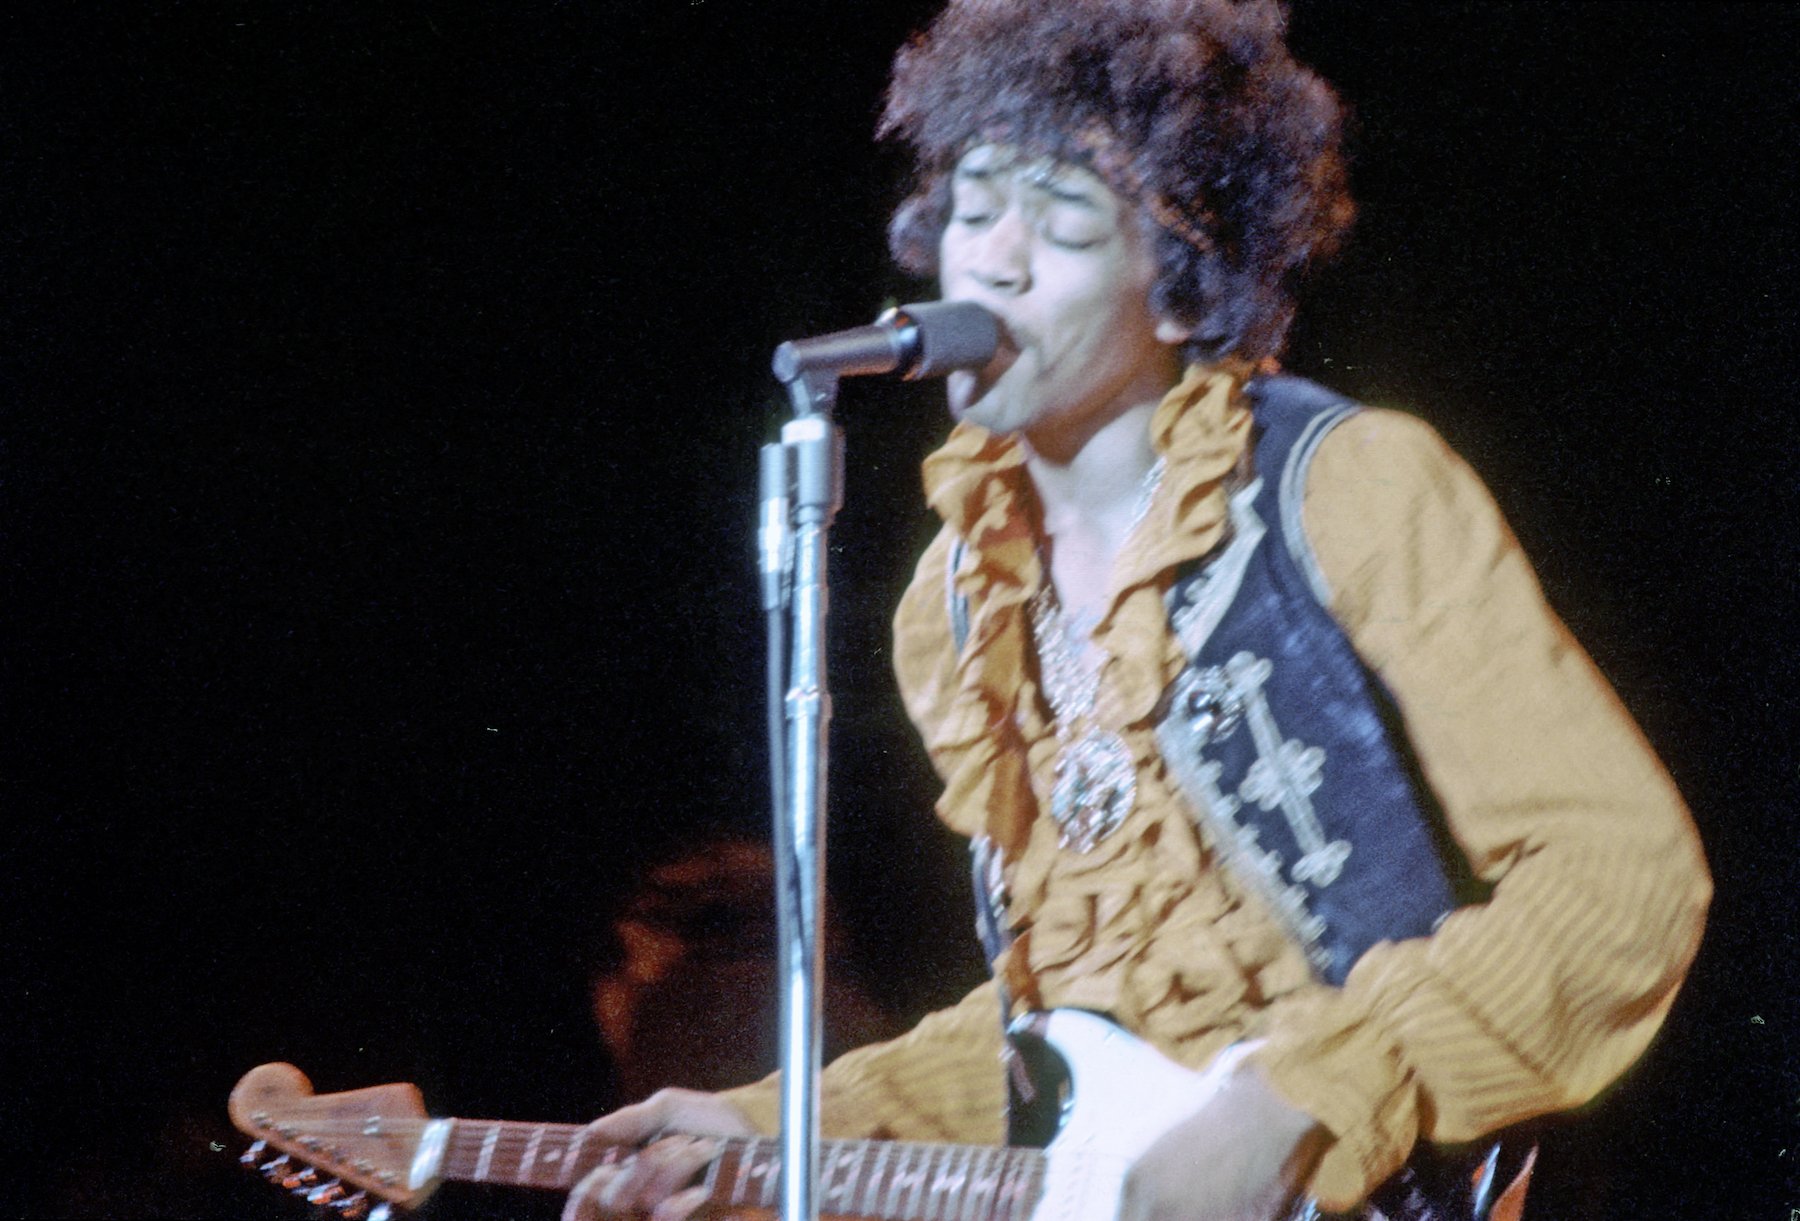 Jimi Hendrix, who played in several bands throughout his career, playing guitar